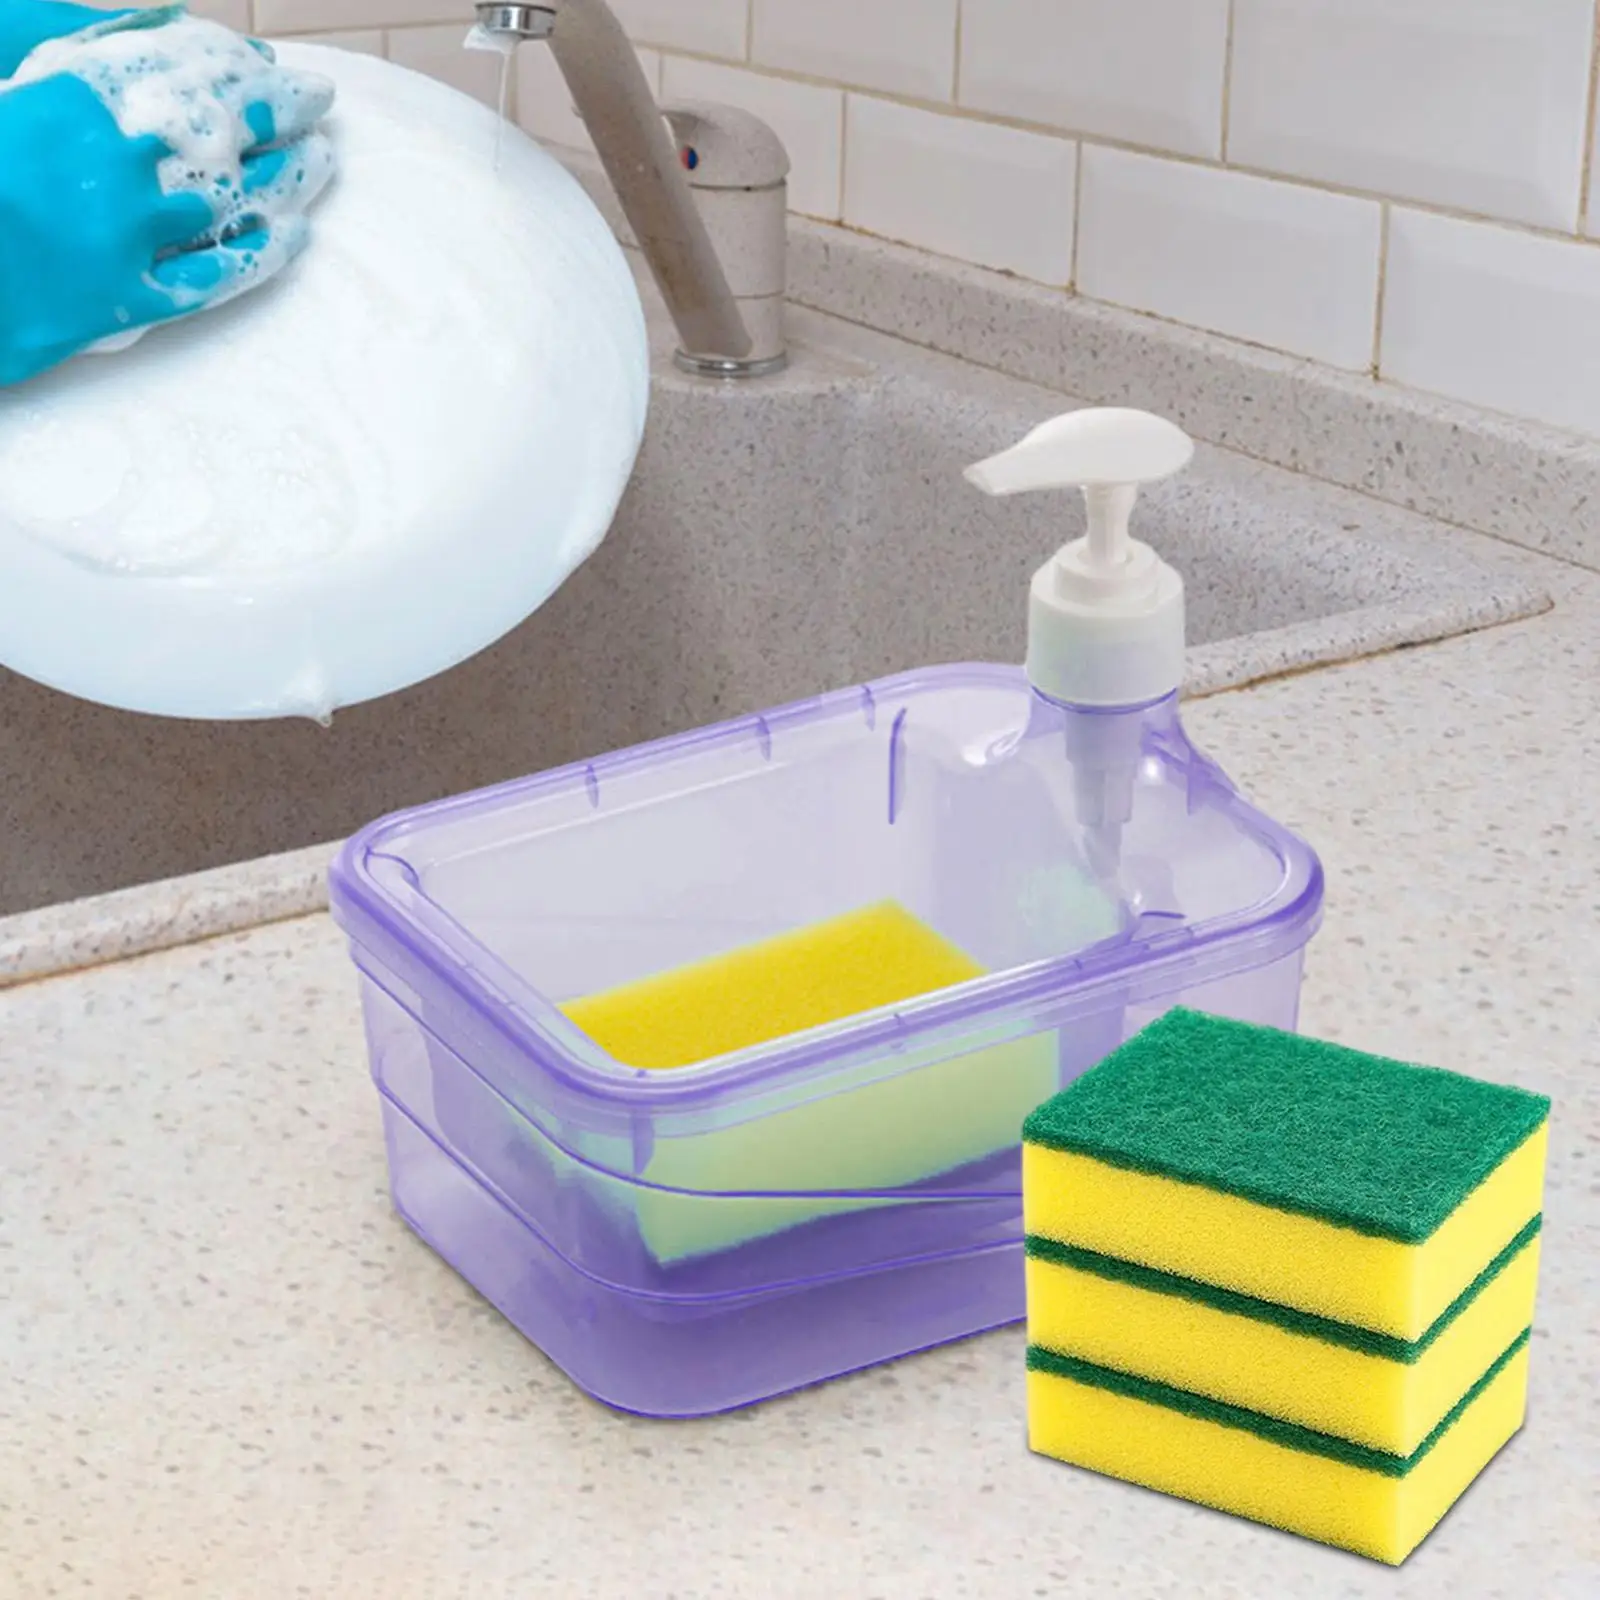 Soap Dispenser and Sponge Holder Manual Anti Slip Storage Container Portable 2 in 1 Gadgets Sink Countertop Organizer for Hotel